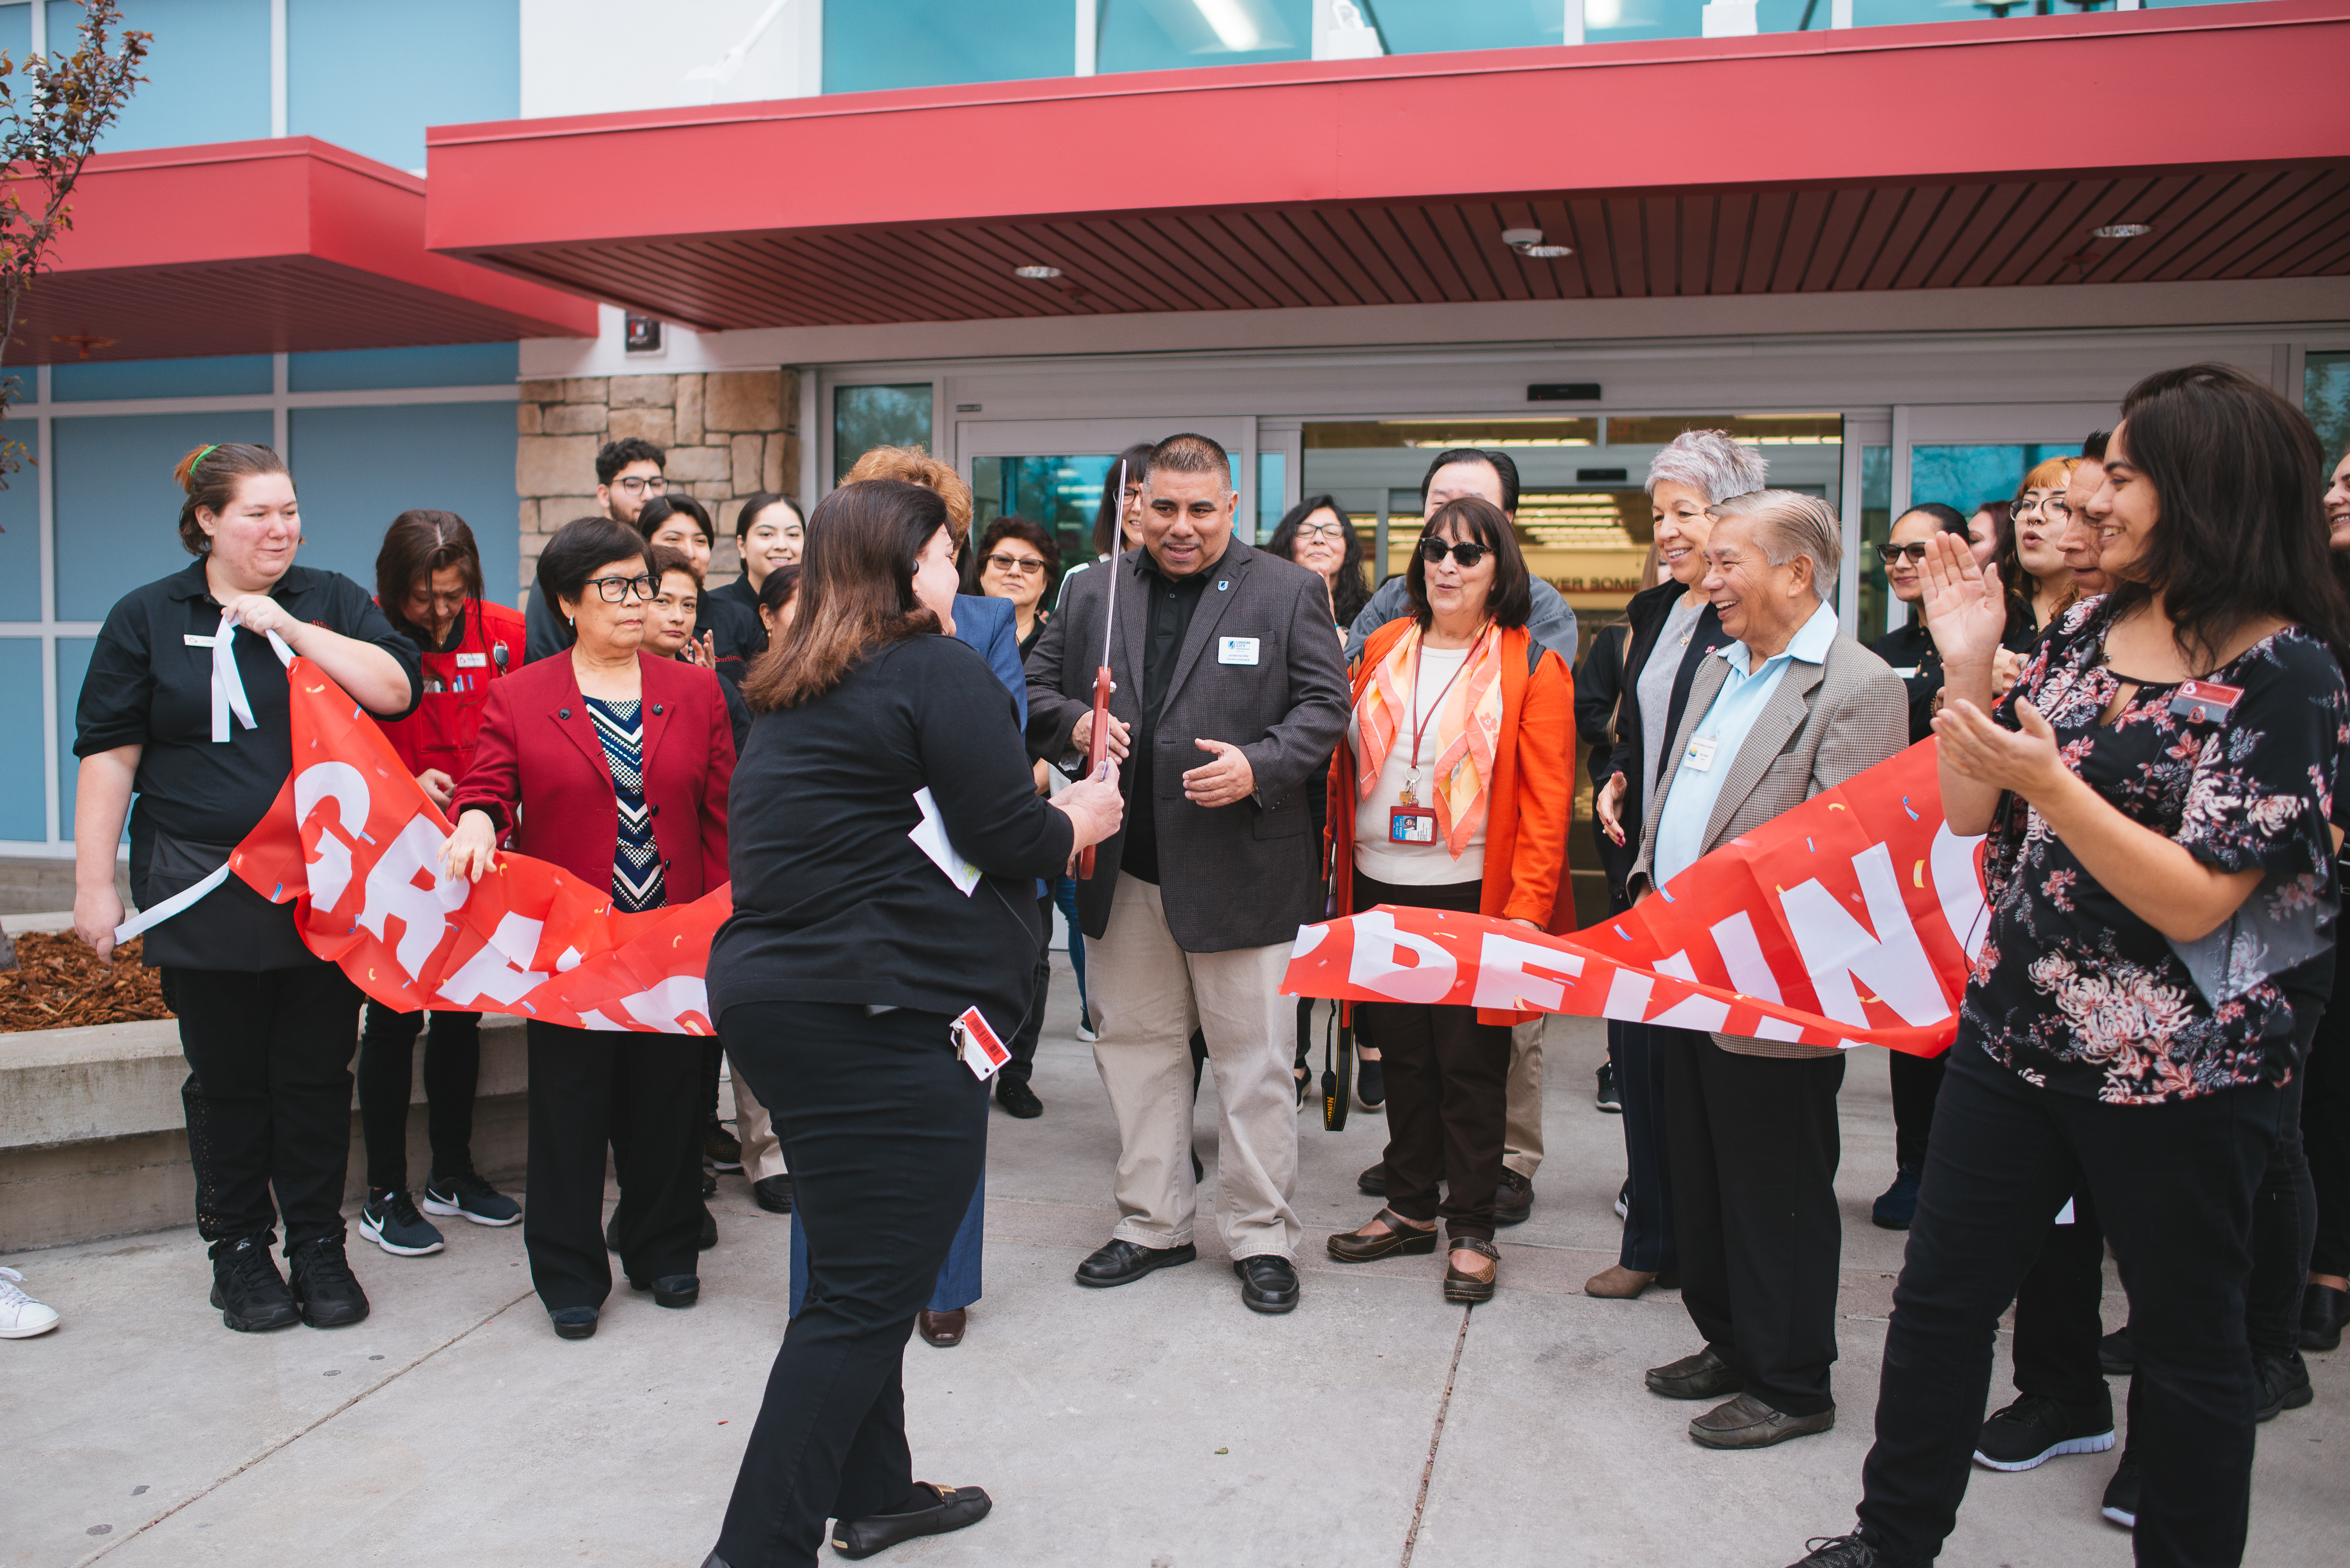 Woman doing the ribbon cutting for Burlington's grand opening.